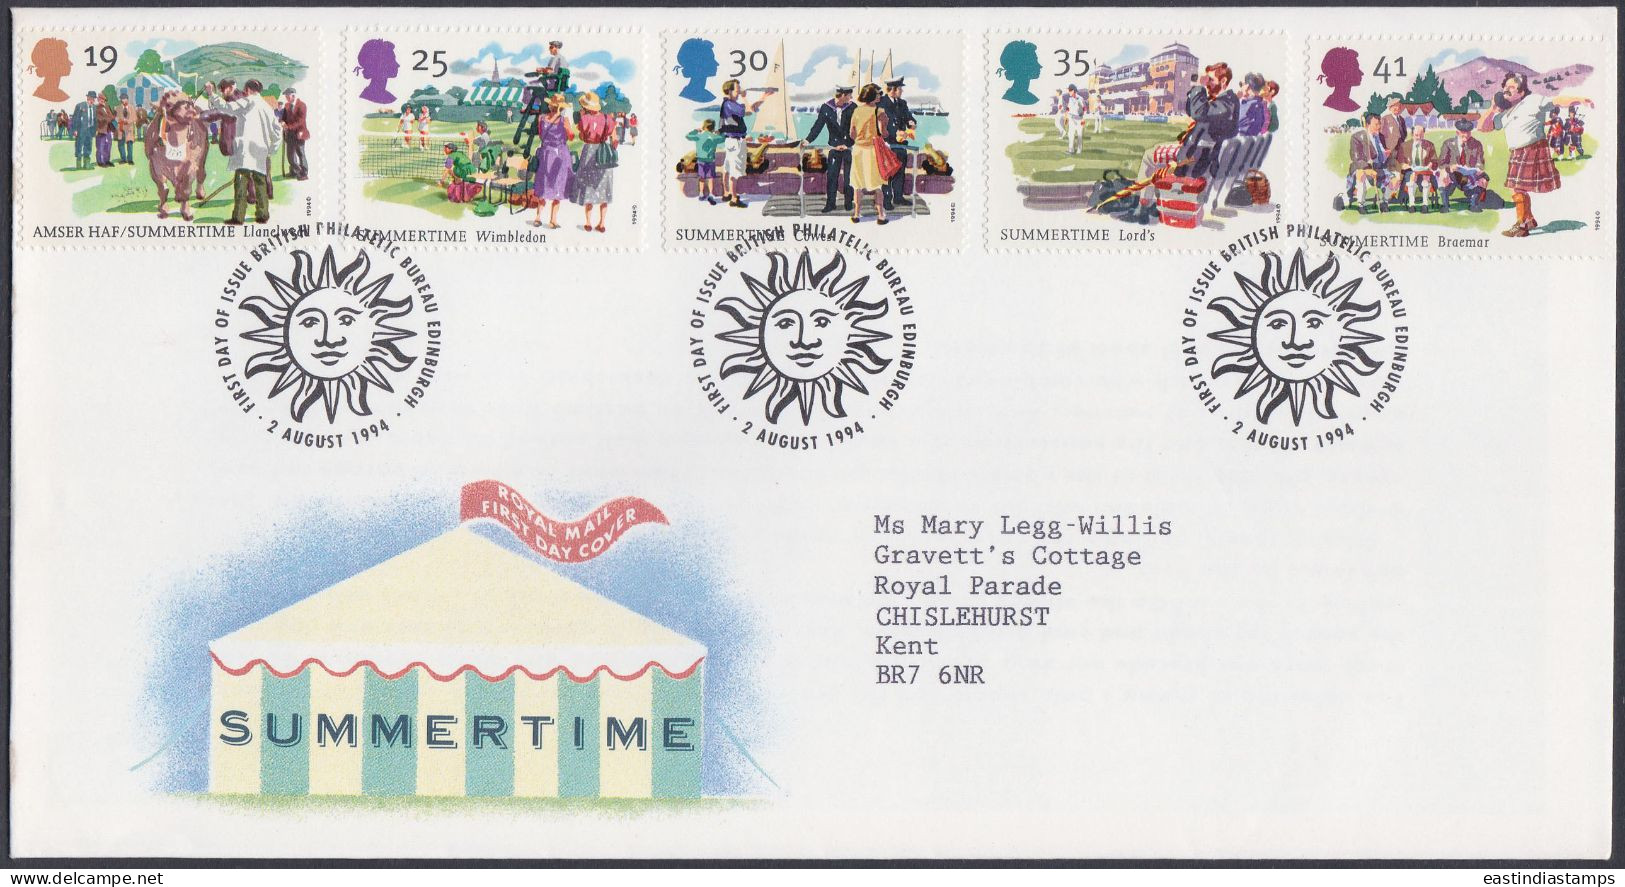 GB Great Britain 1994 FDC Summertime, Cricket, Tennis, Sailing, Sport, Sports, Pictorial Postmark, First Day Cover - Covers & Documents